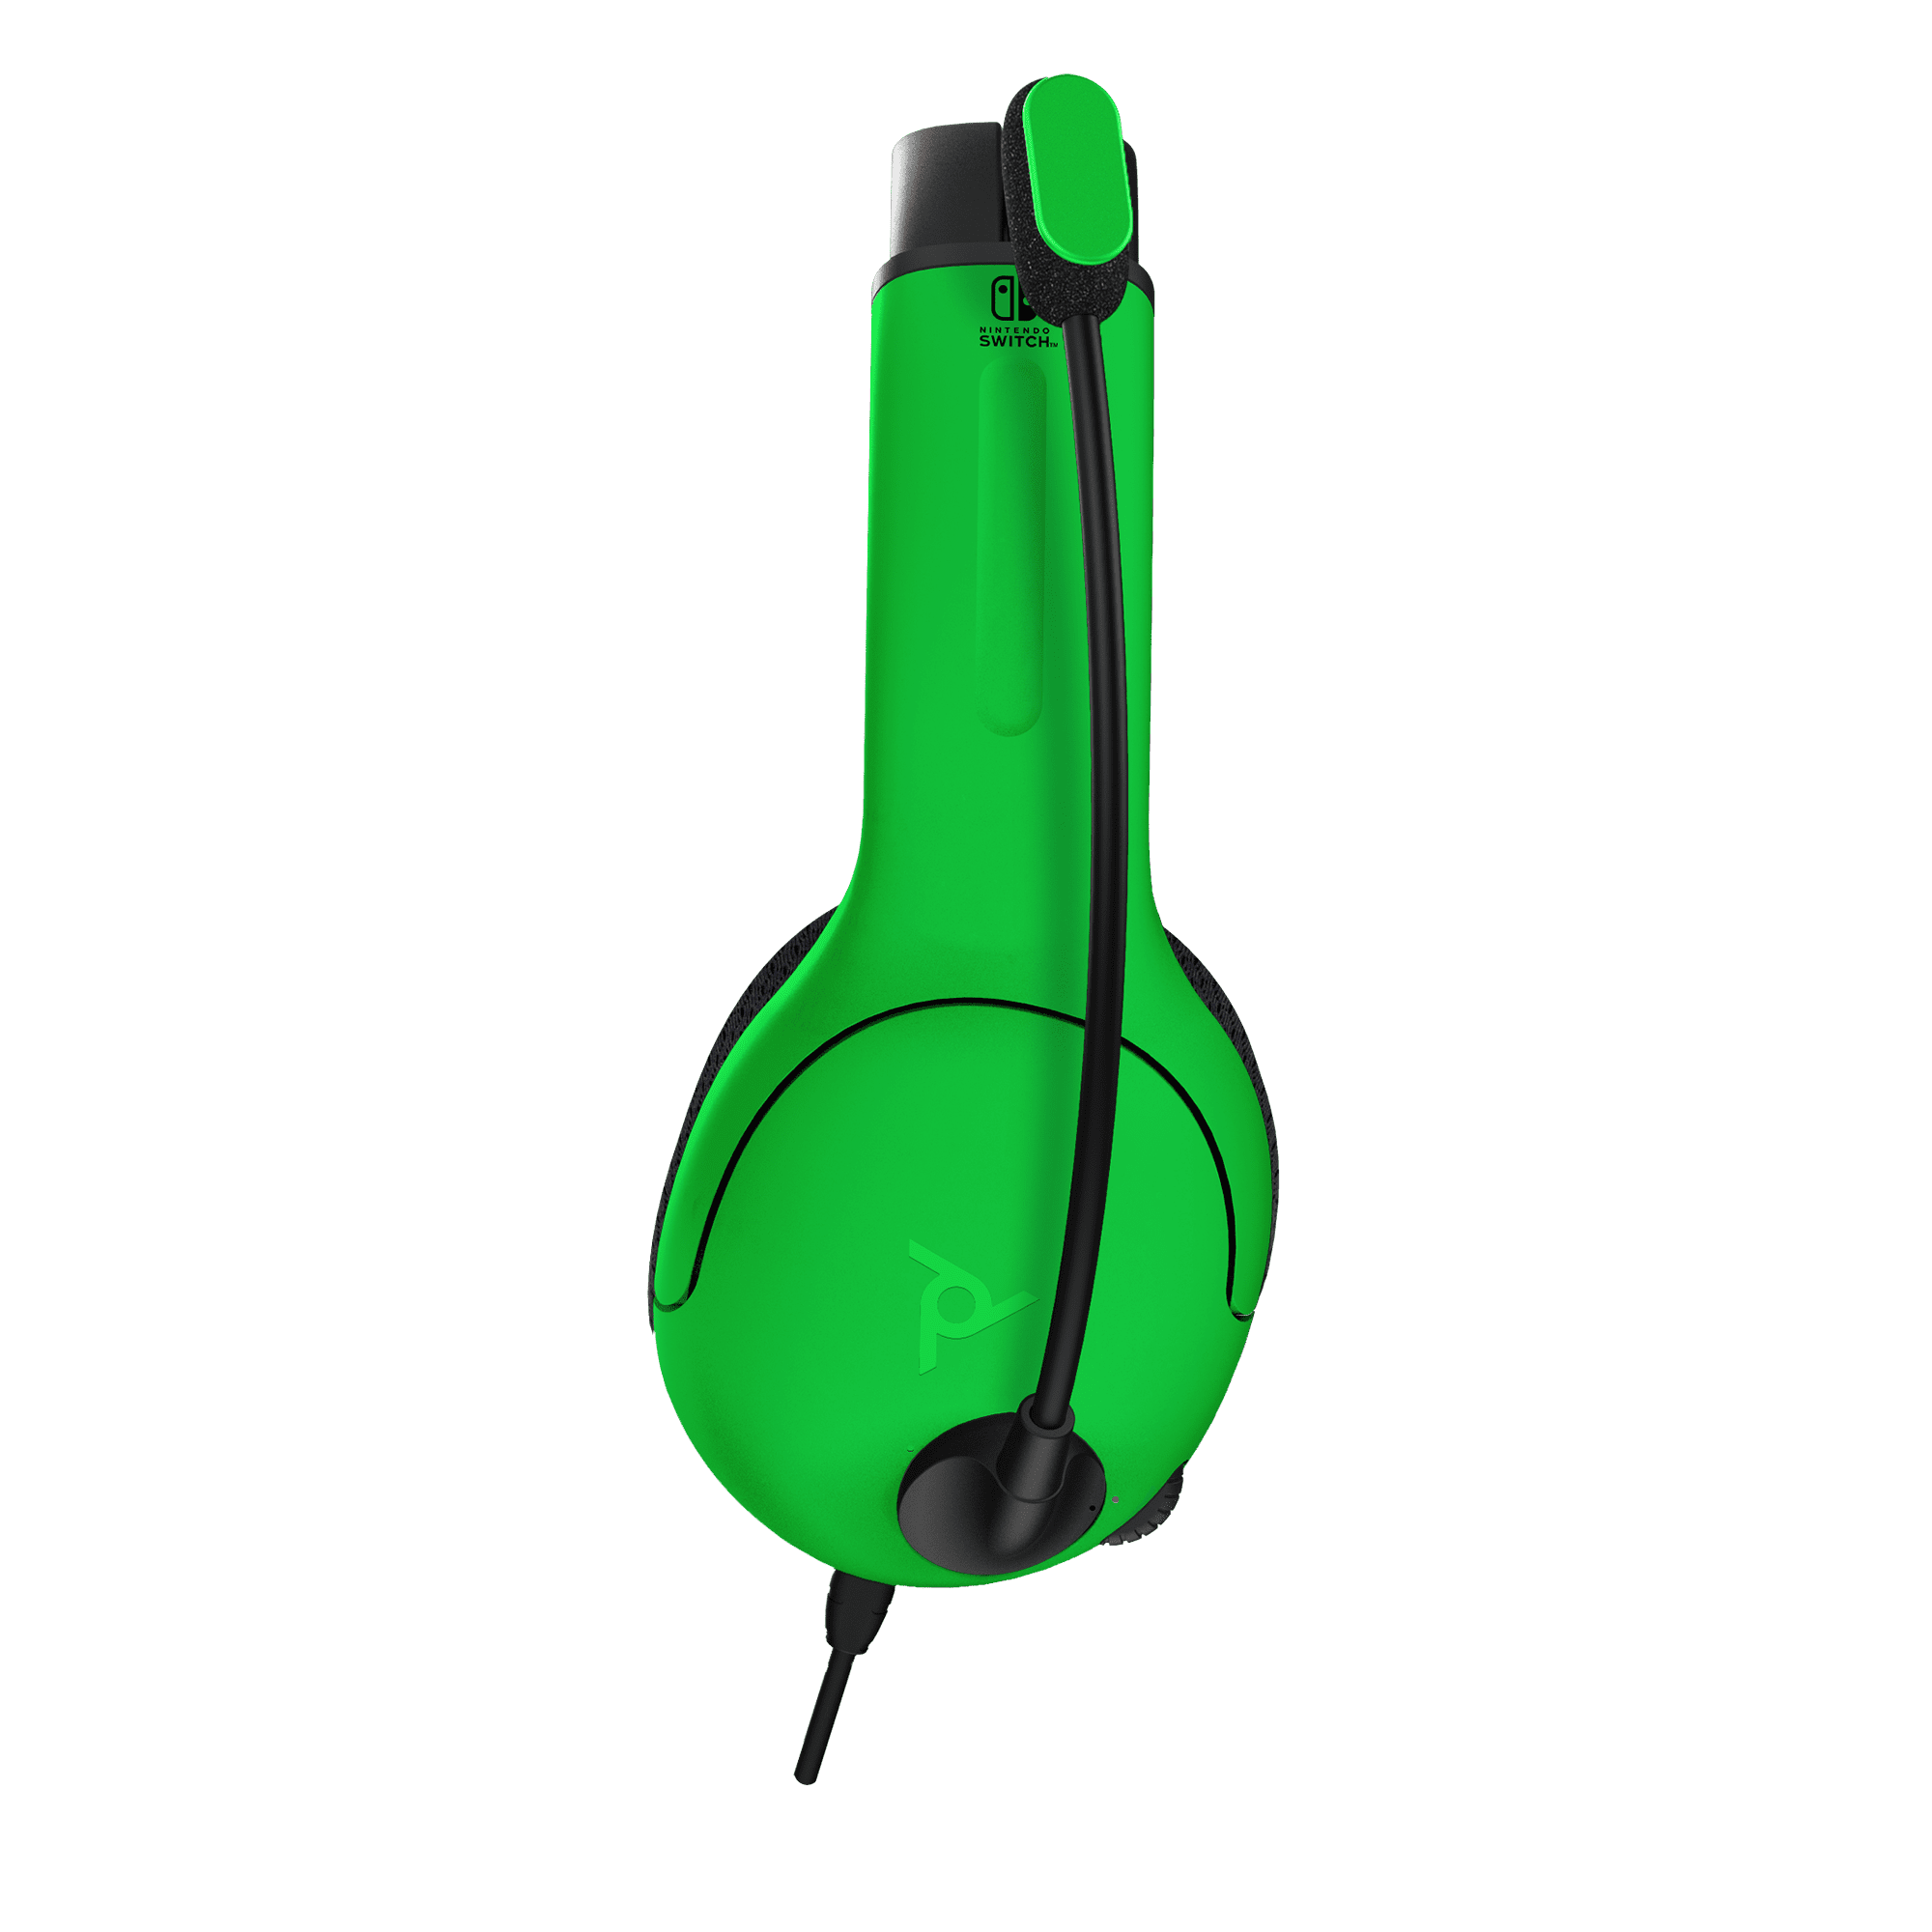 Pdp Gaming Lvl40 Stereo Headset With Mic For Nintendo Switch - Pc